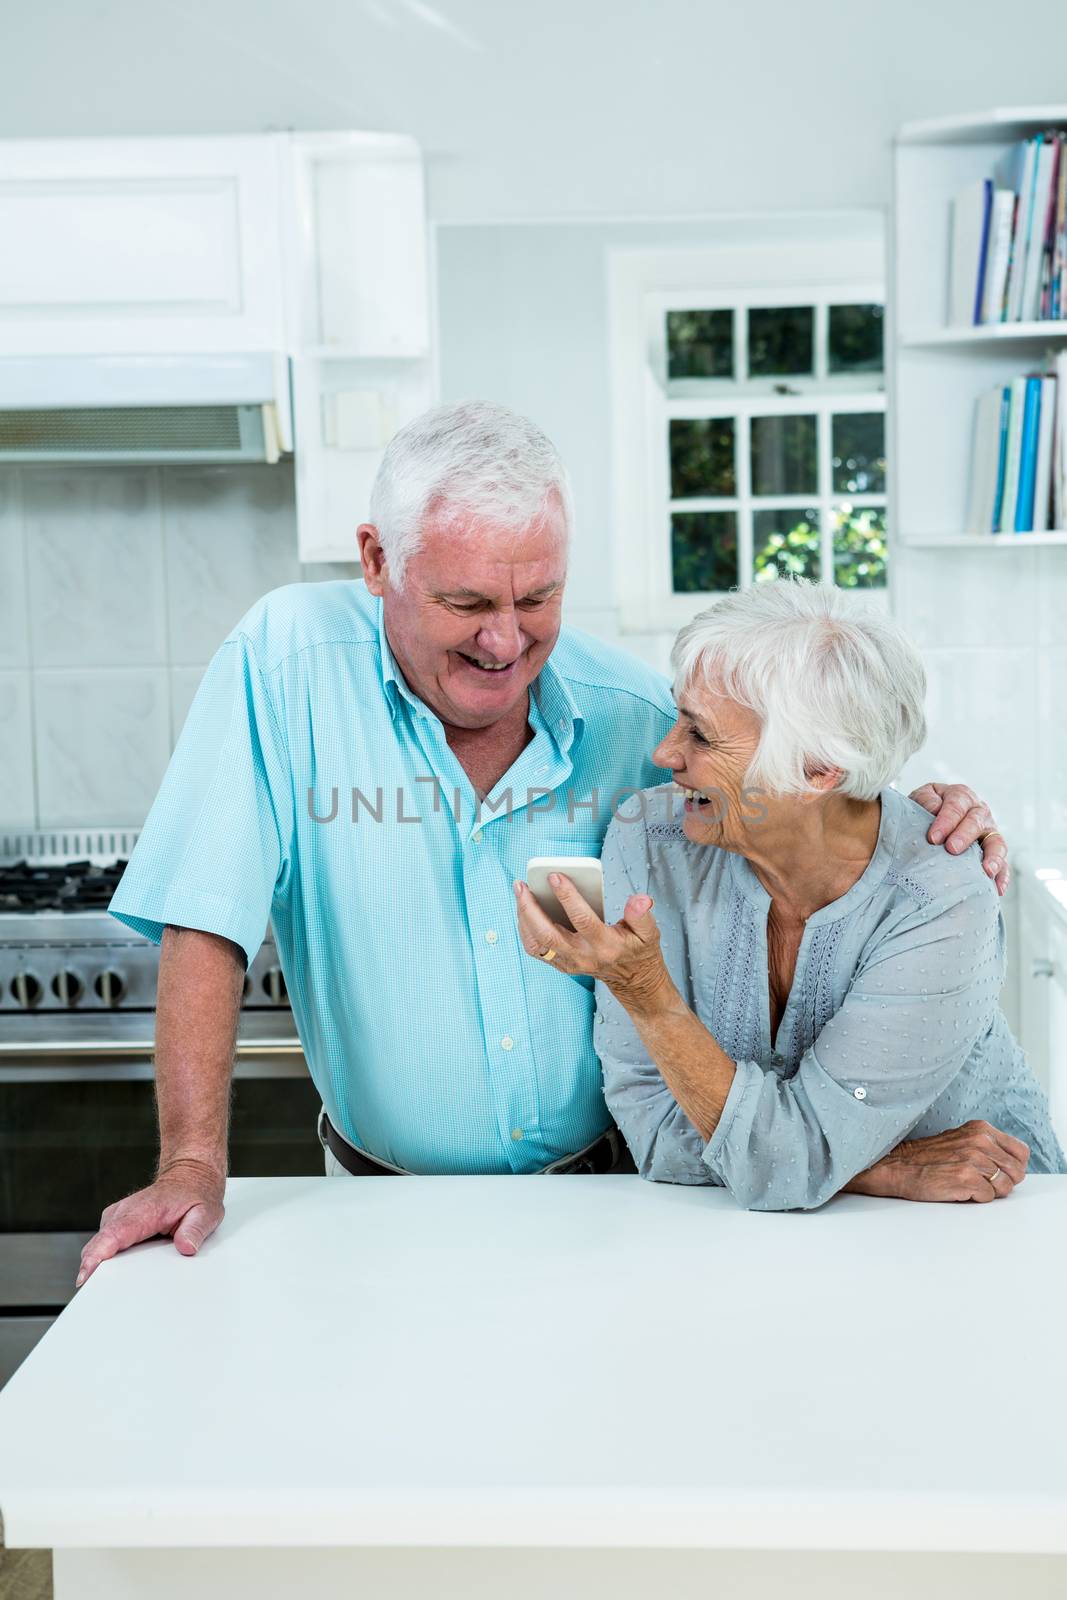 Smiling senior woman showing phone to man while standing in kitchen